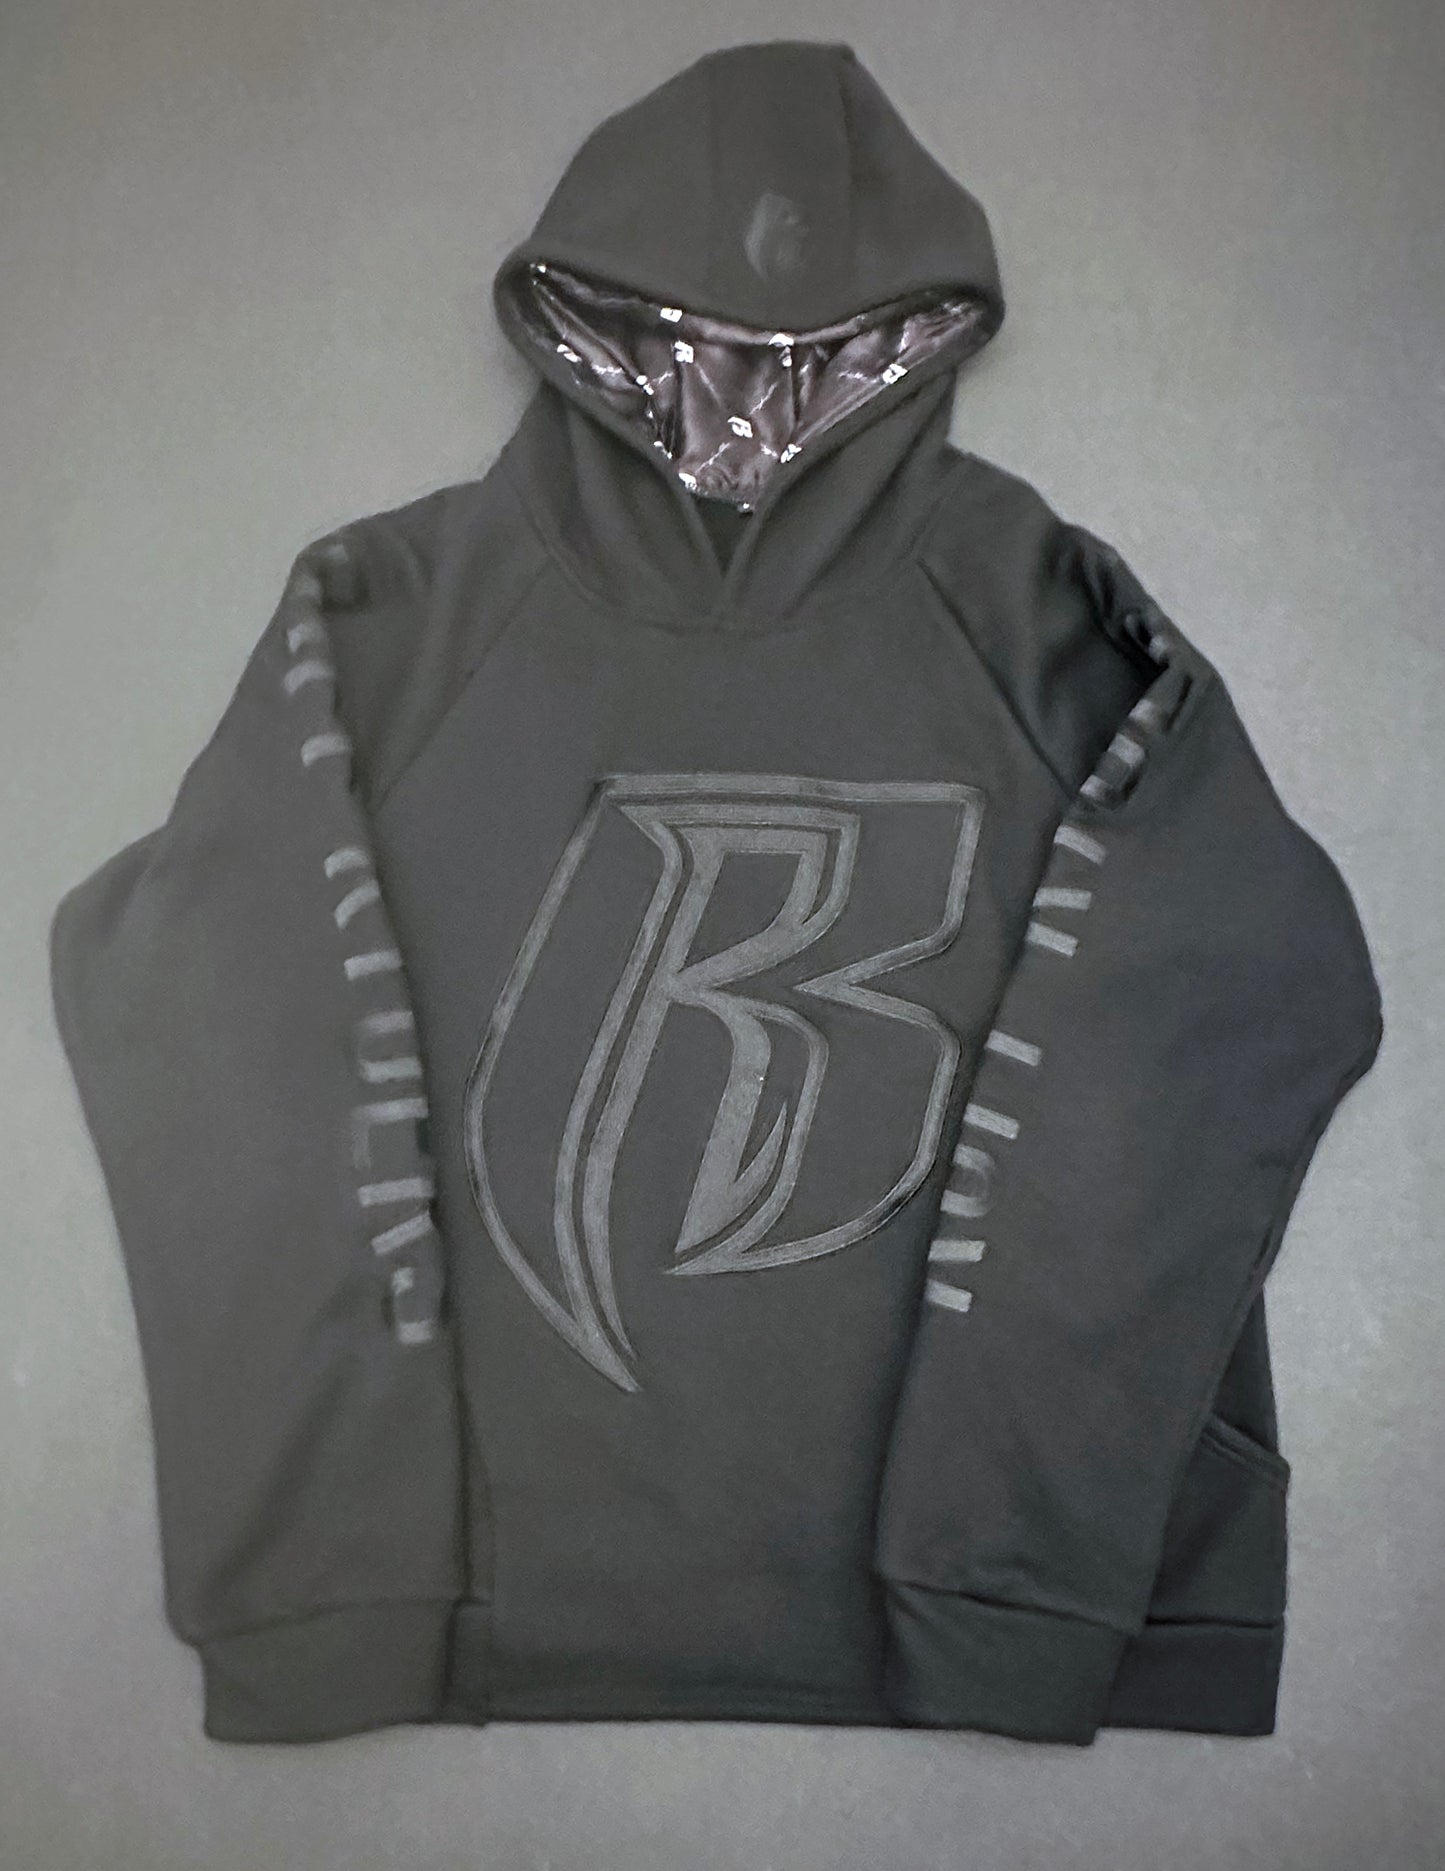 BLKRR Embroidered Hoodie